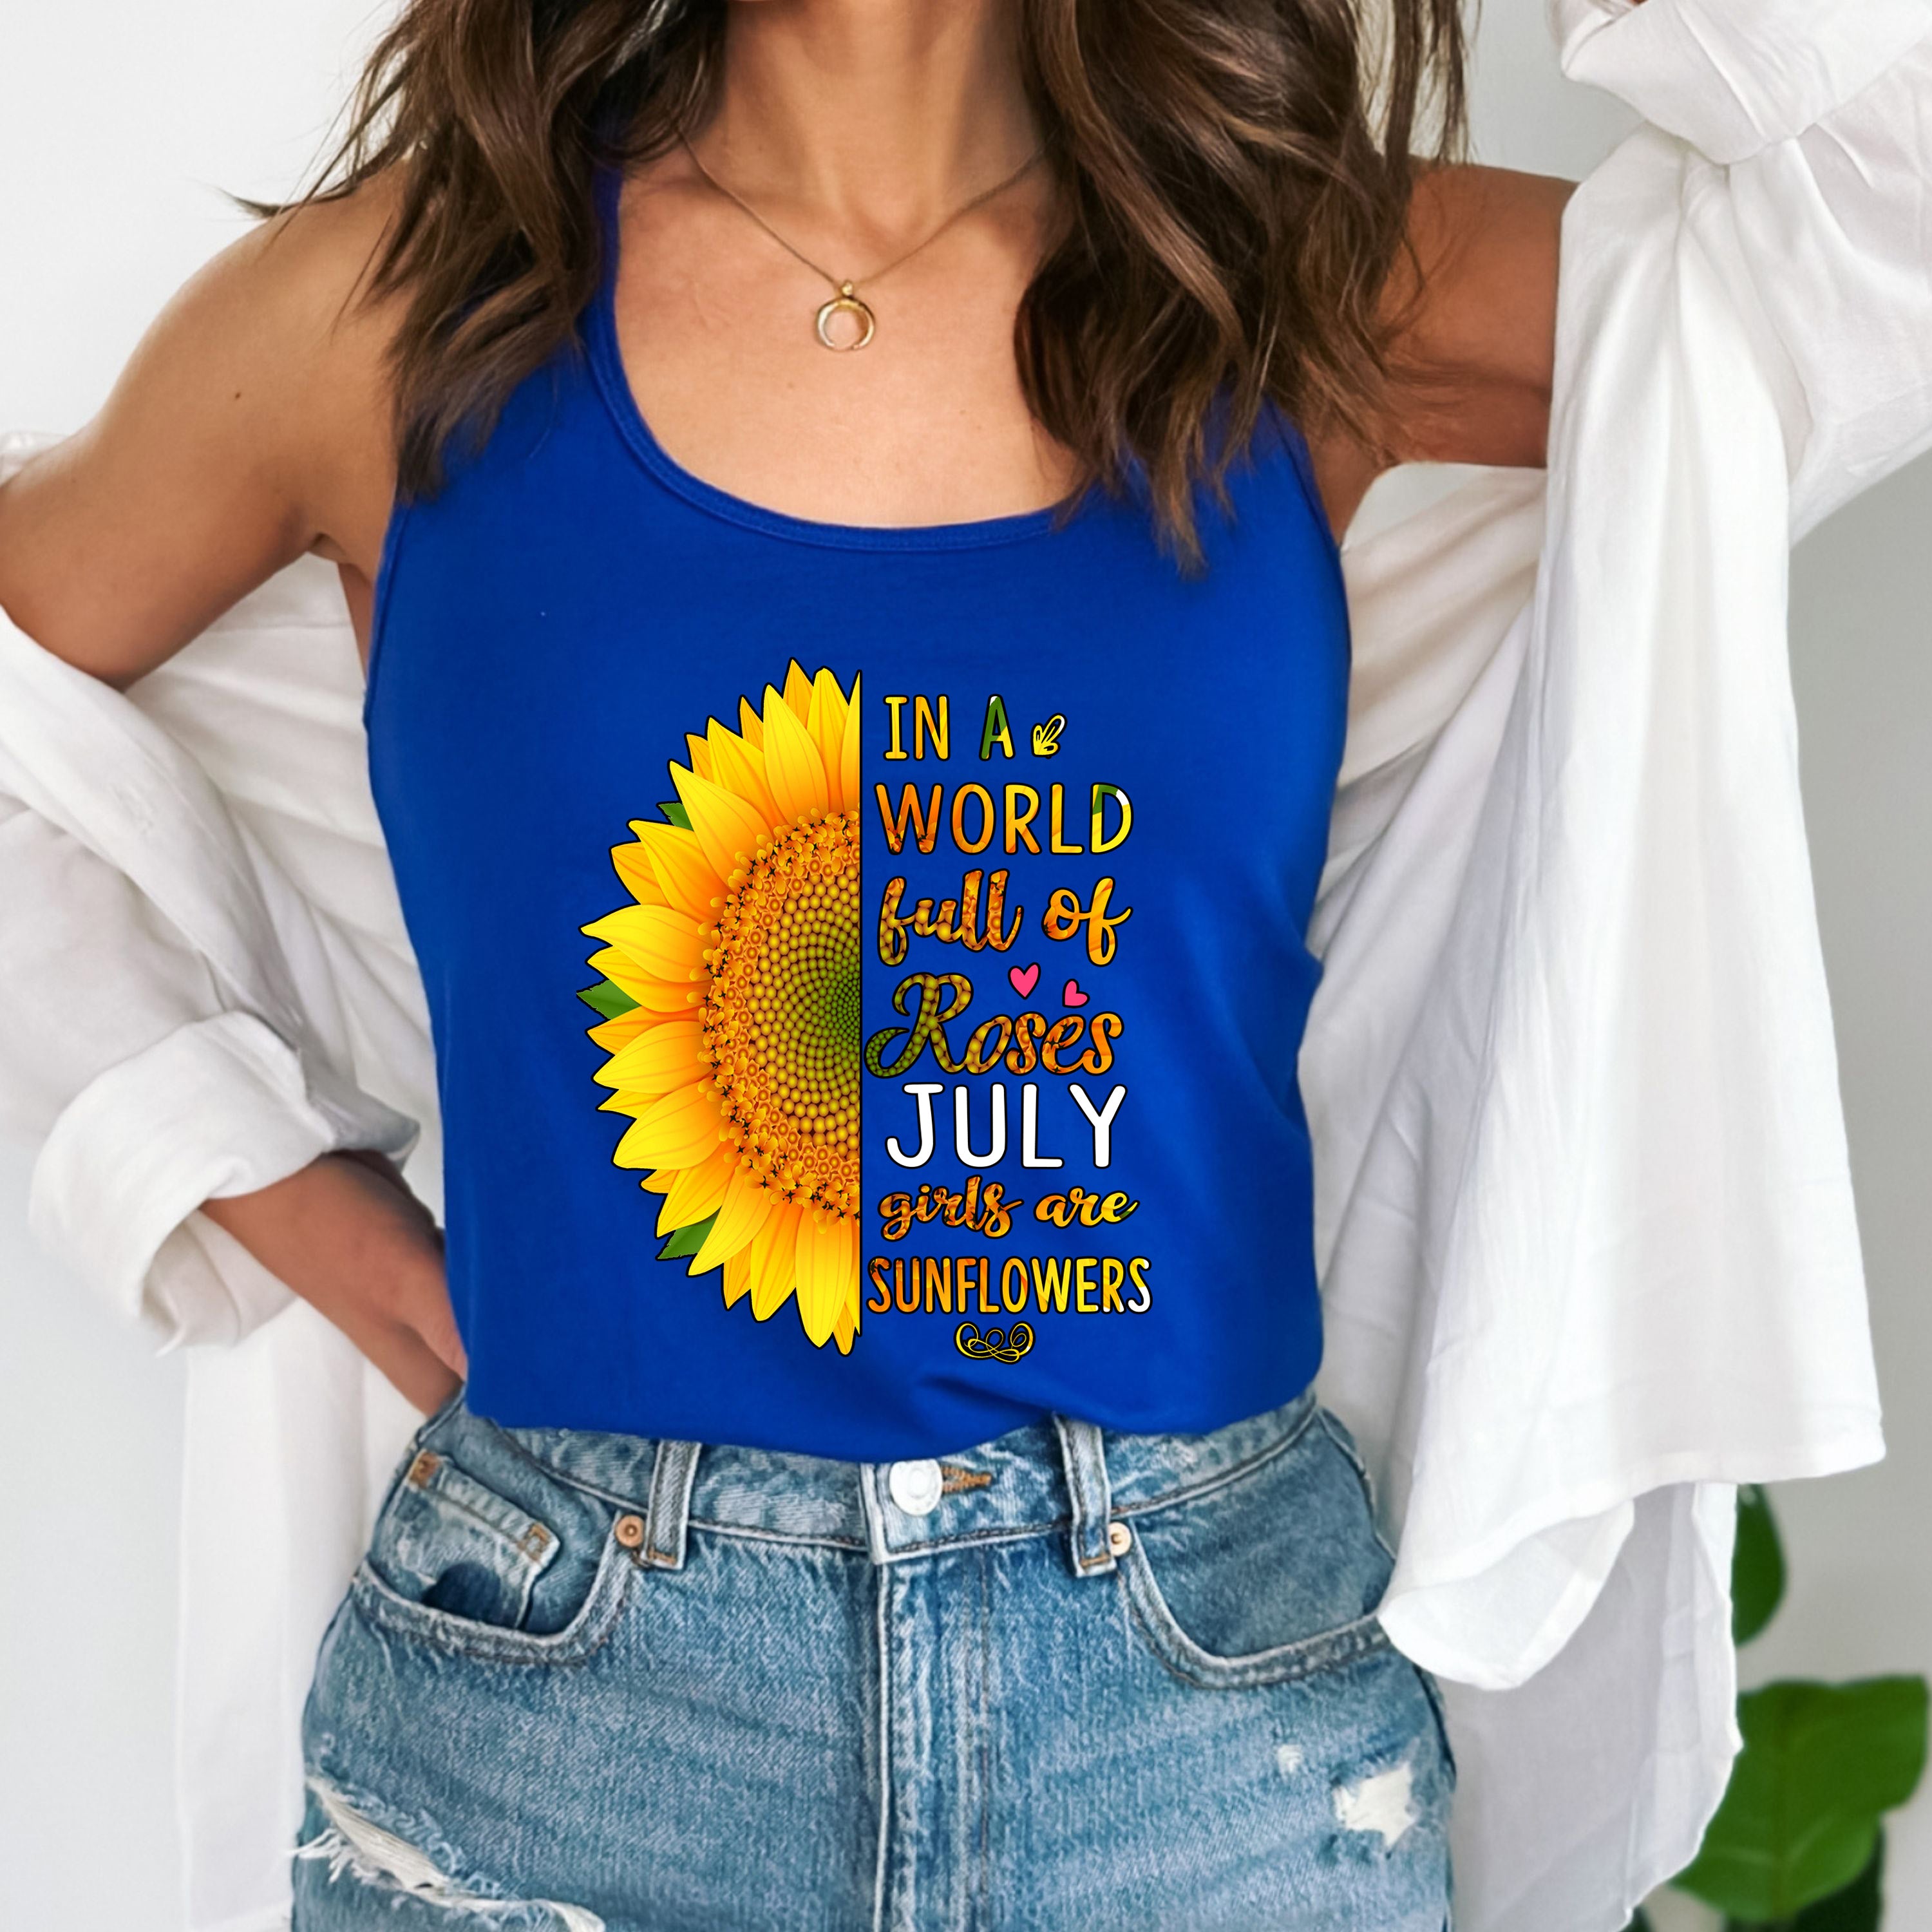 "In a world full of roses July girls are Sunflowers"